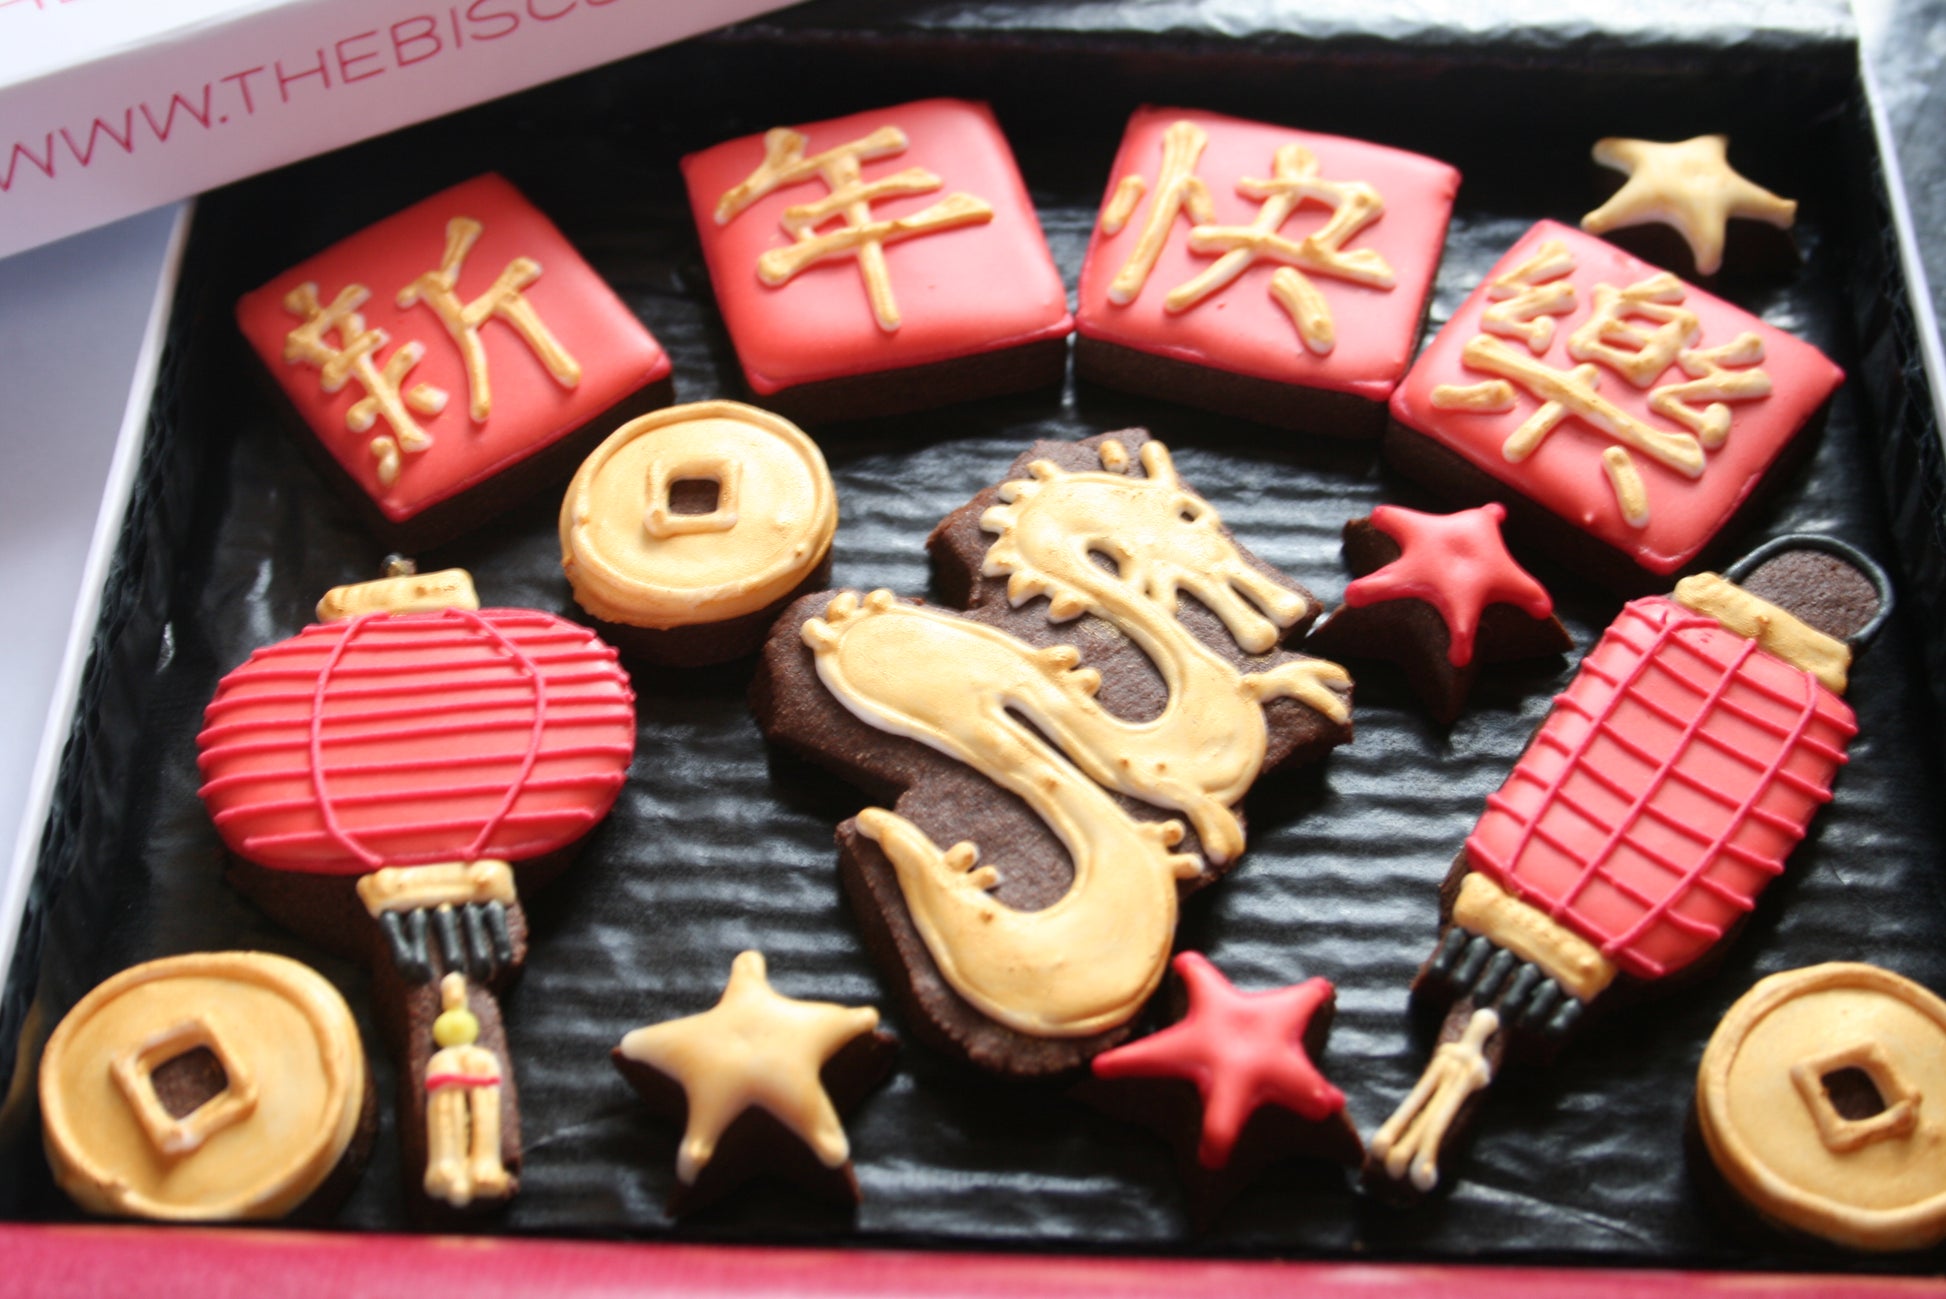 bespoke biscuits and custom cookies. Chinese new year cookies. Chinese dragon biscuits. red and gold cookies with Chinese dragon and new year symbols